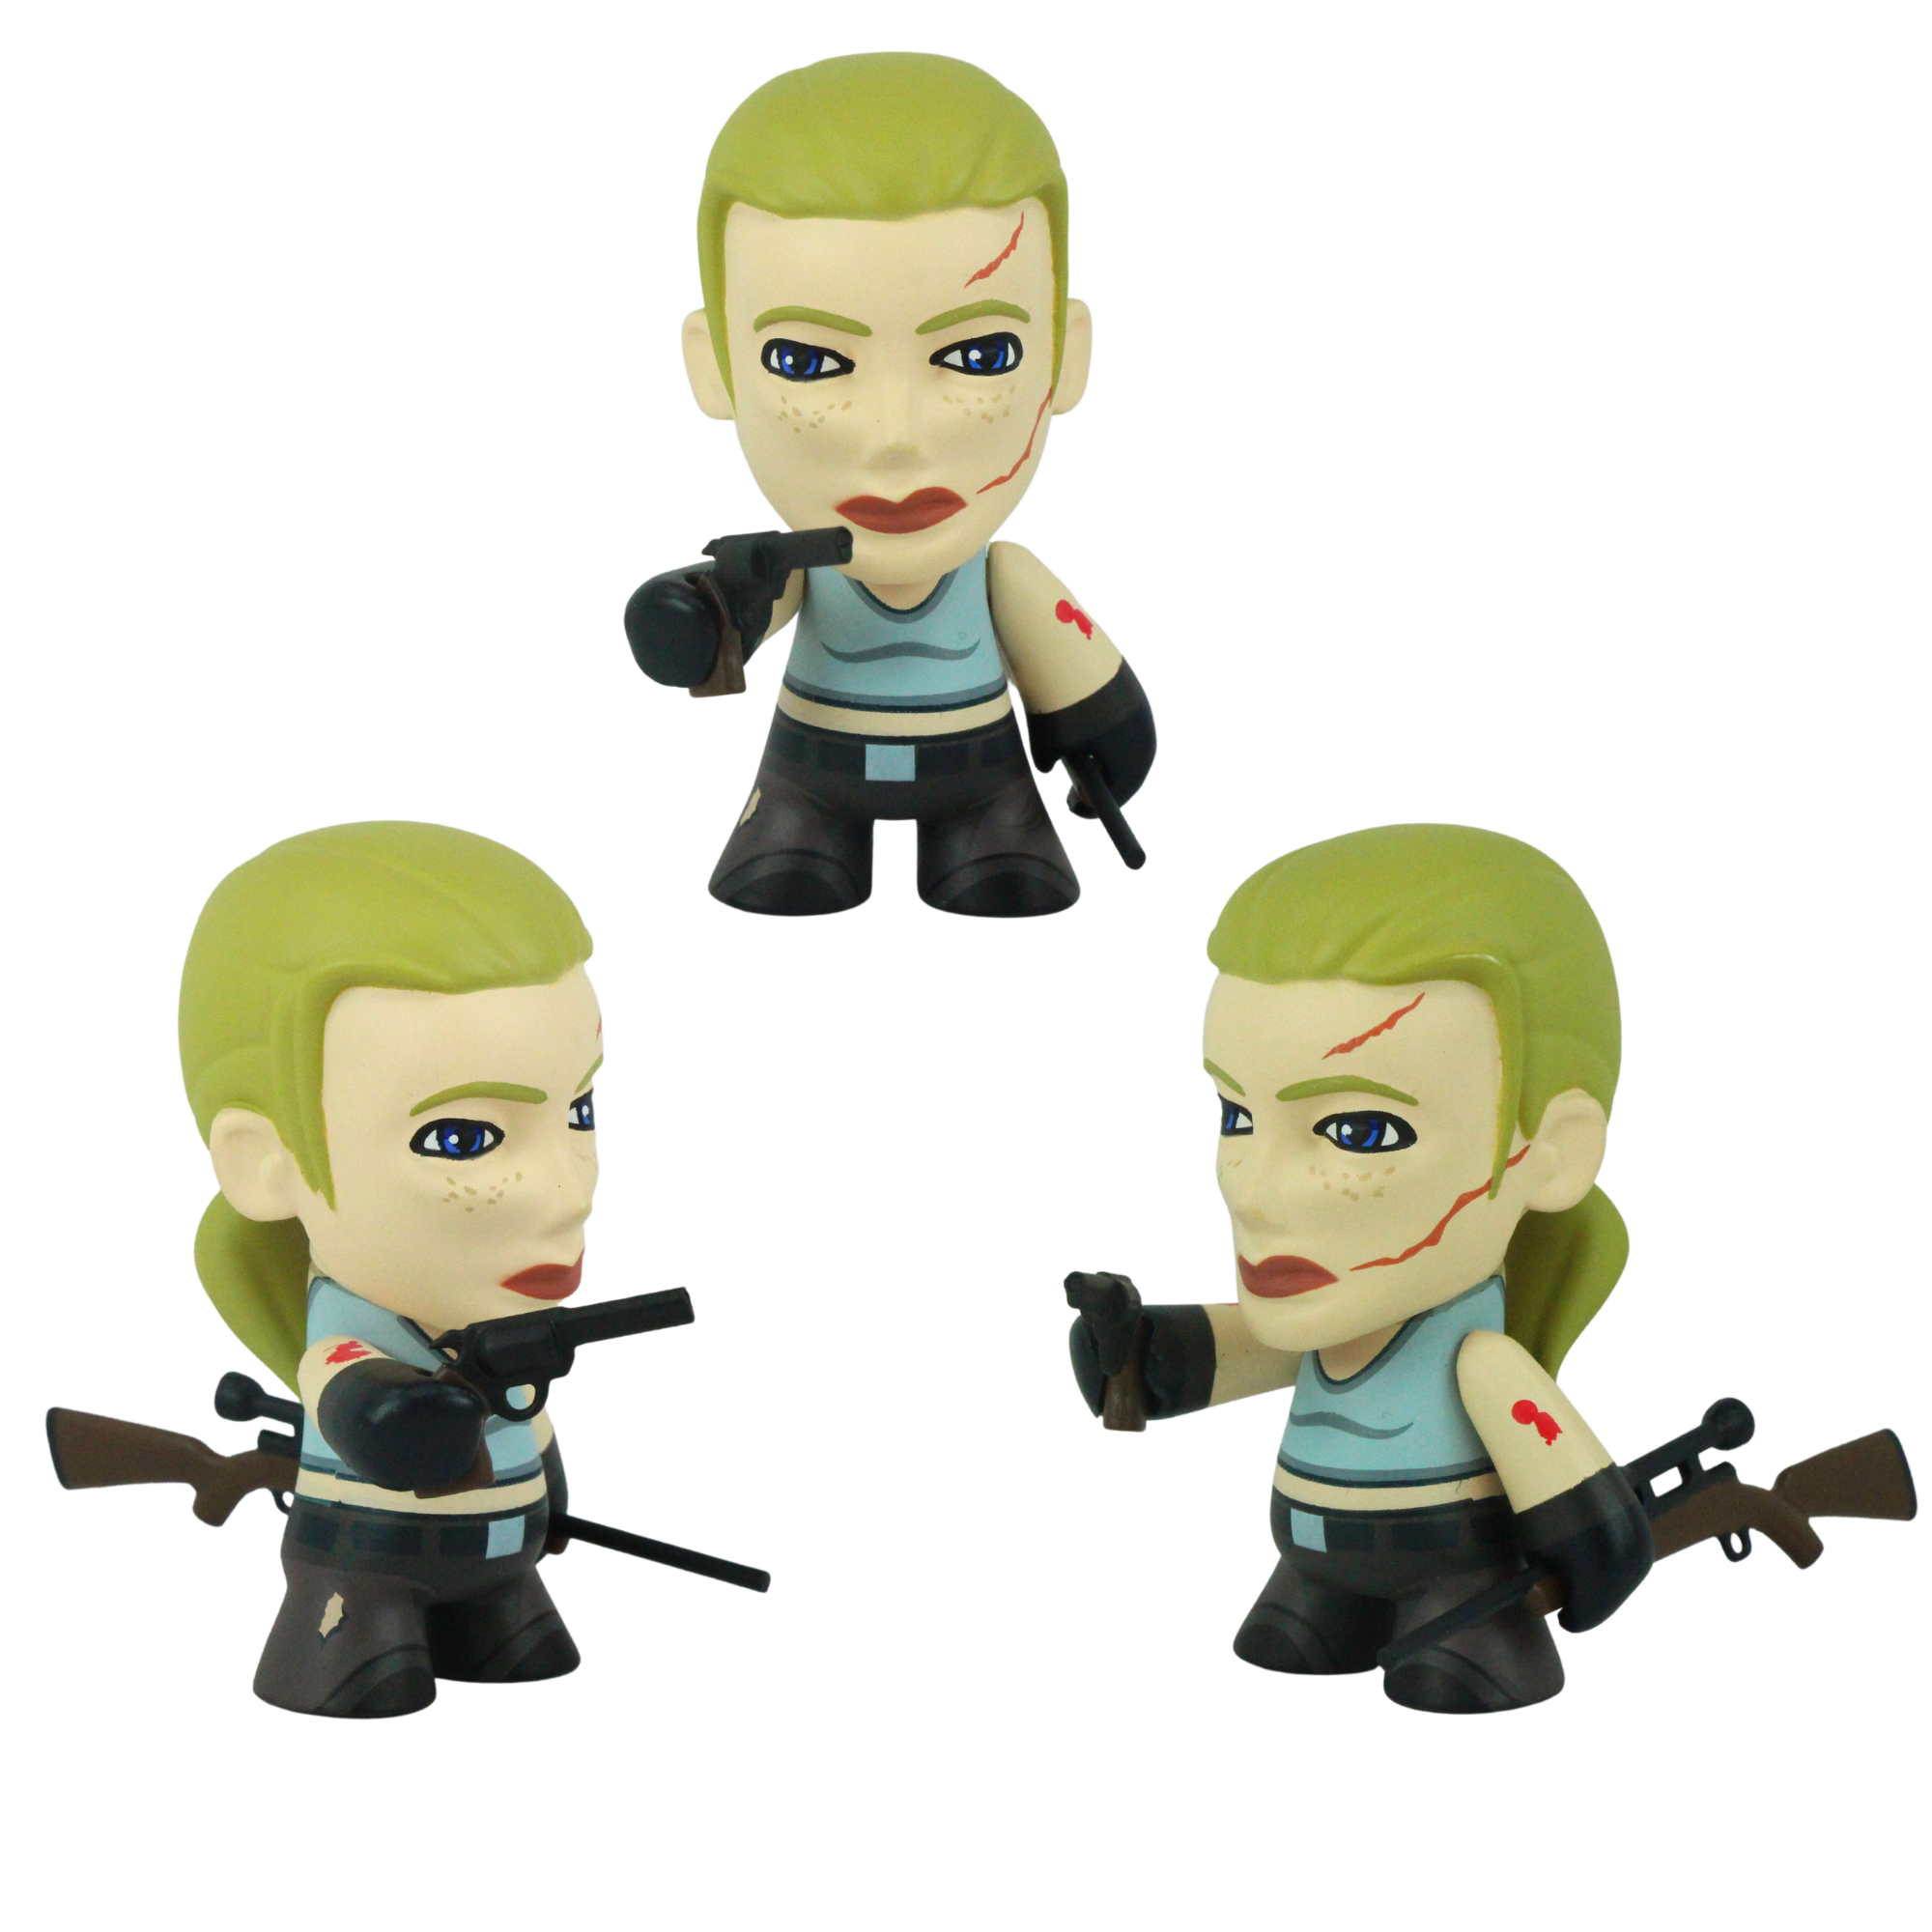 Skybound Minis Series 1 Character Figures, The Walking Dead, Invincible, Science Dog & More Blind Box Party Favours Pack of 6 - Toptoys2u